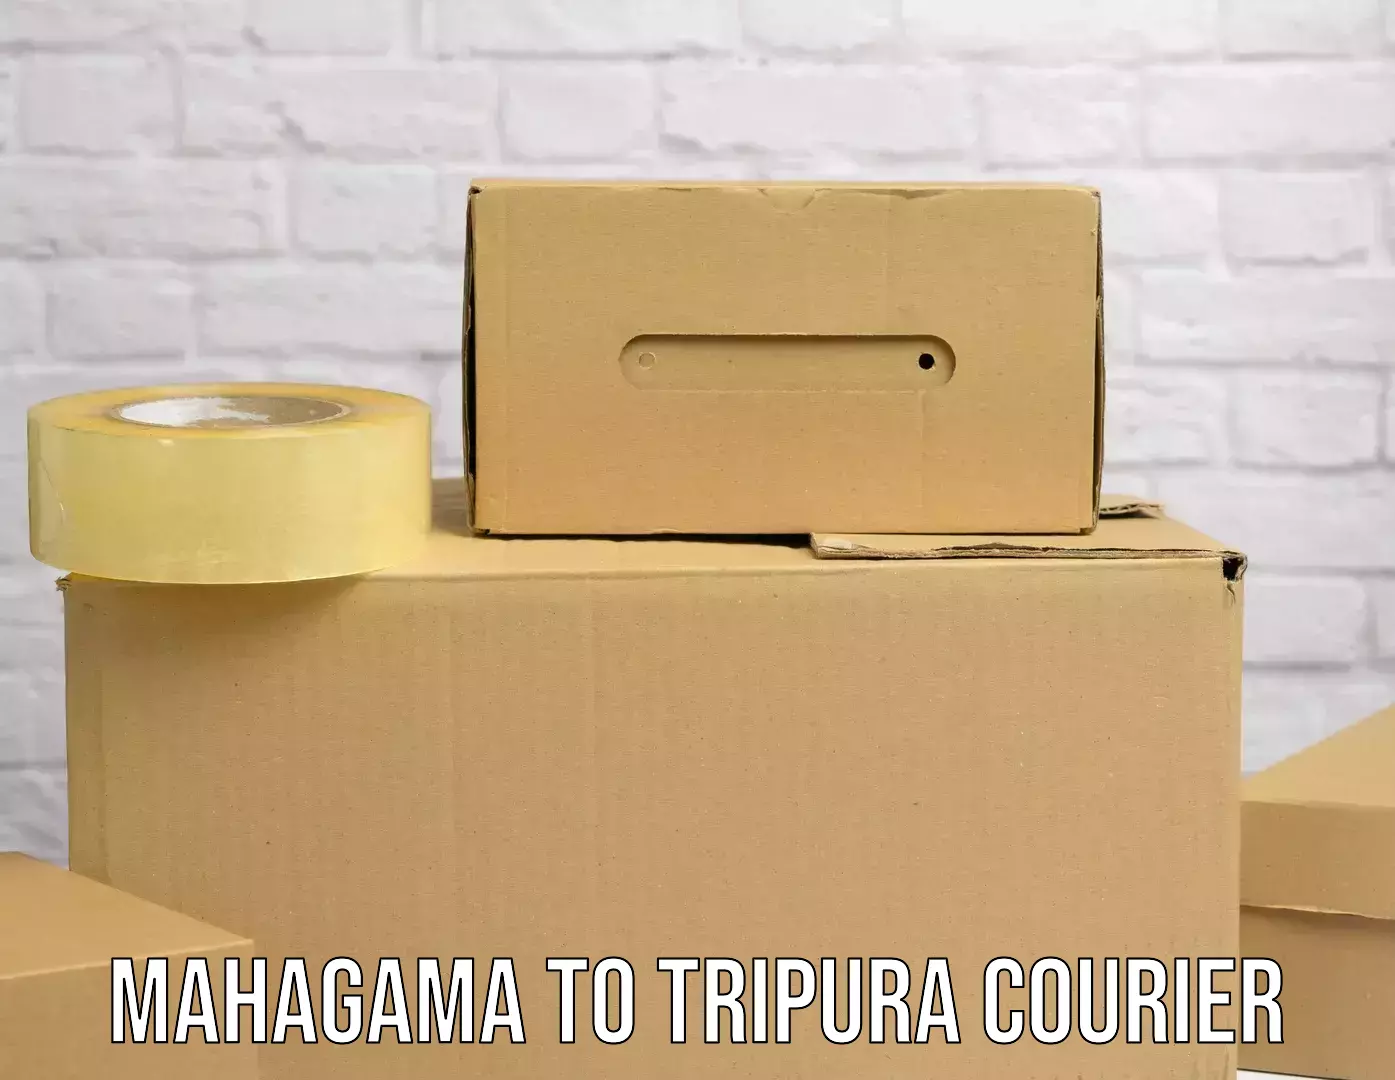 Urgent courier needs Mahagama to Dhalai